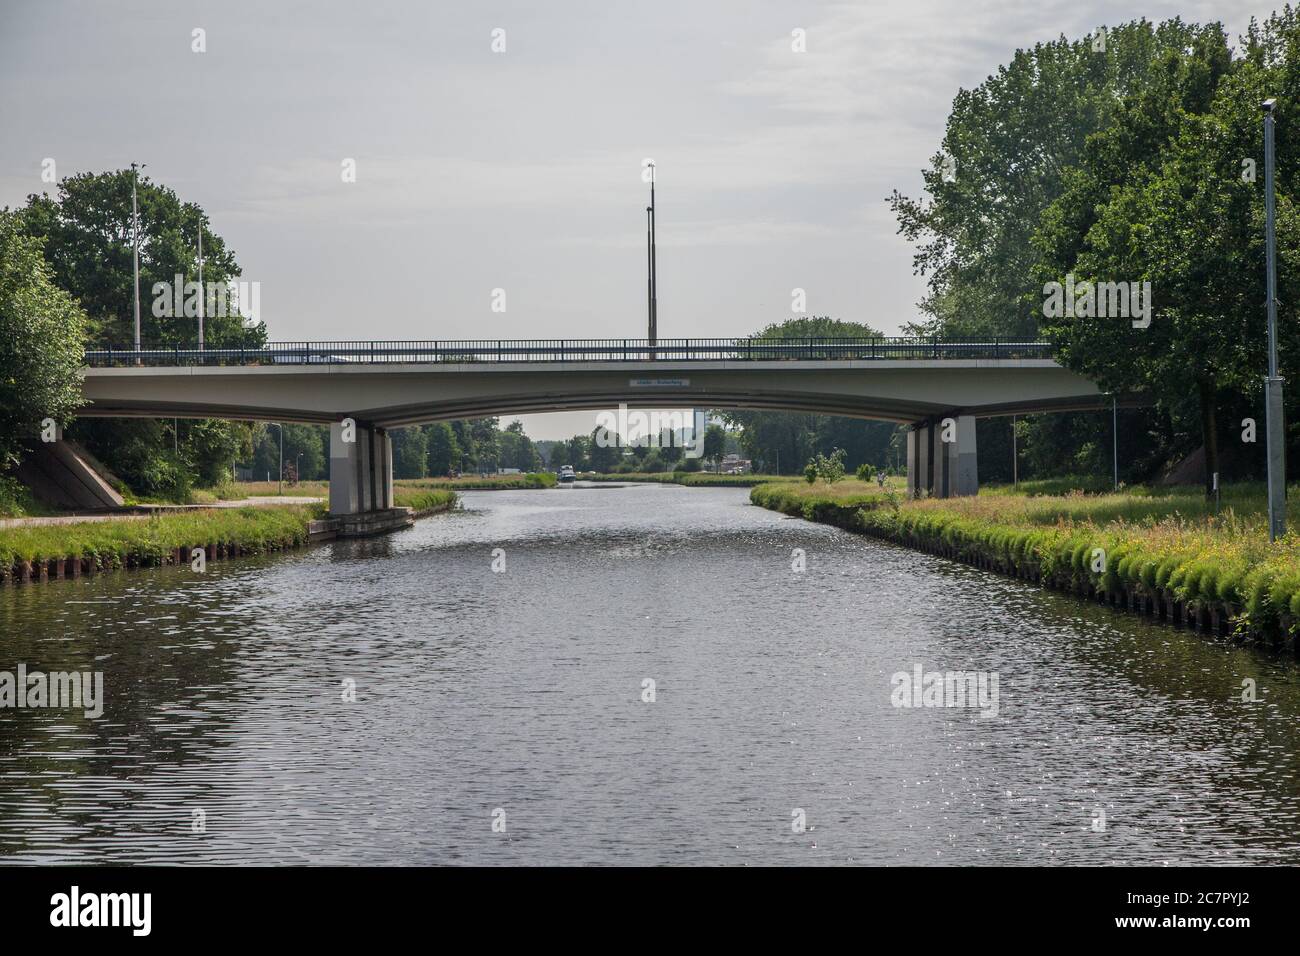 Two ways of transport crossing each other i.e. road and water. Stock Photo